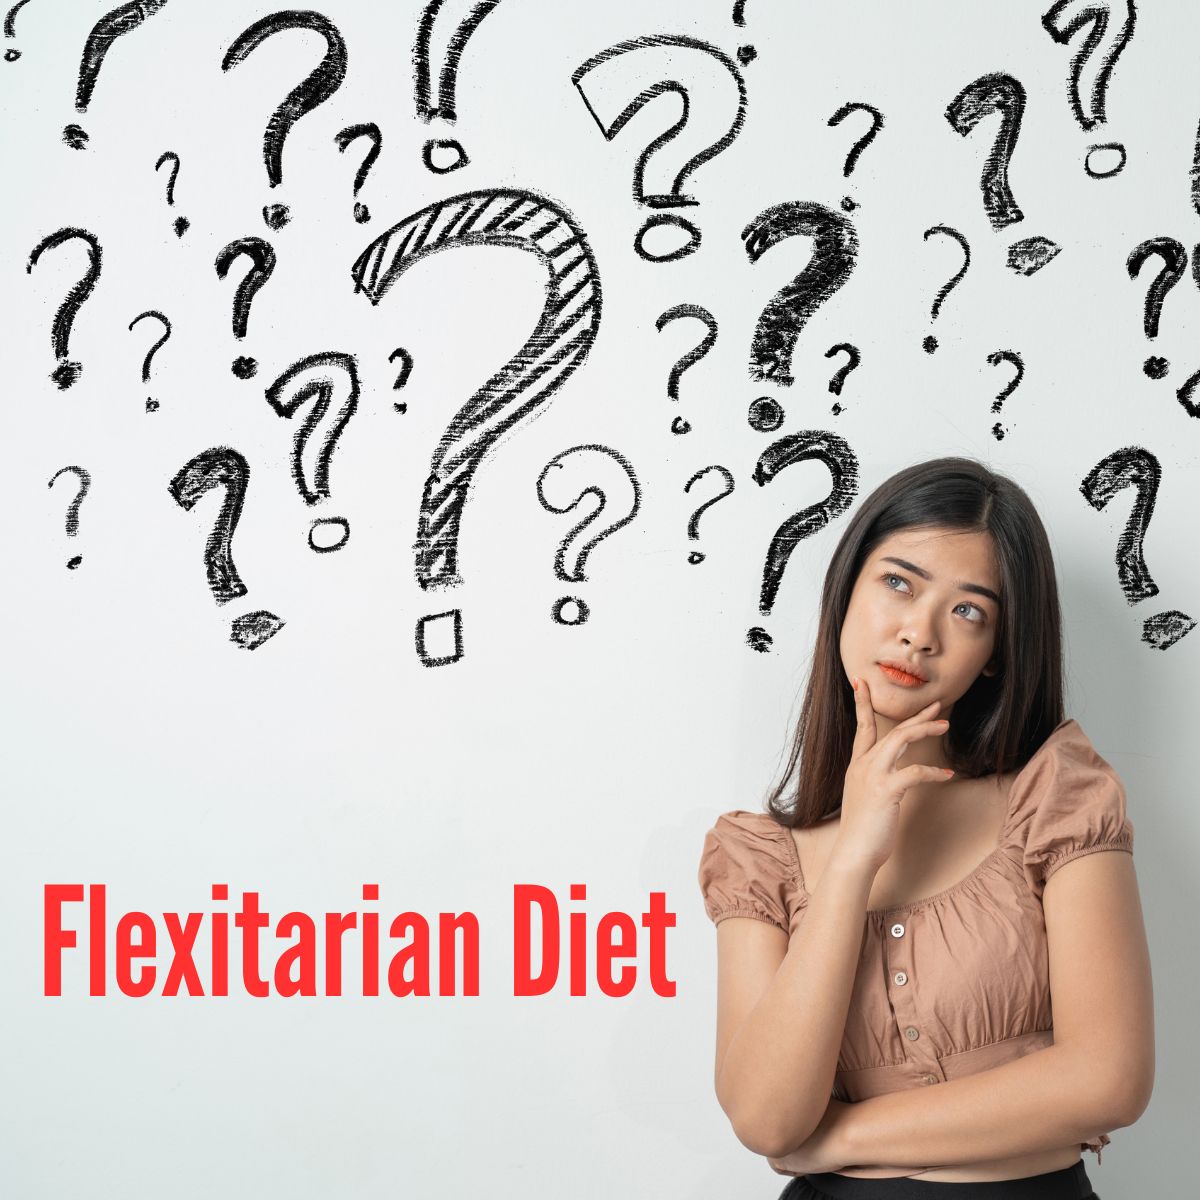 Flexitarian Diet with question marks and a female with black hair pondering